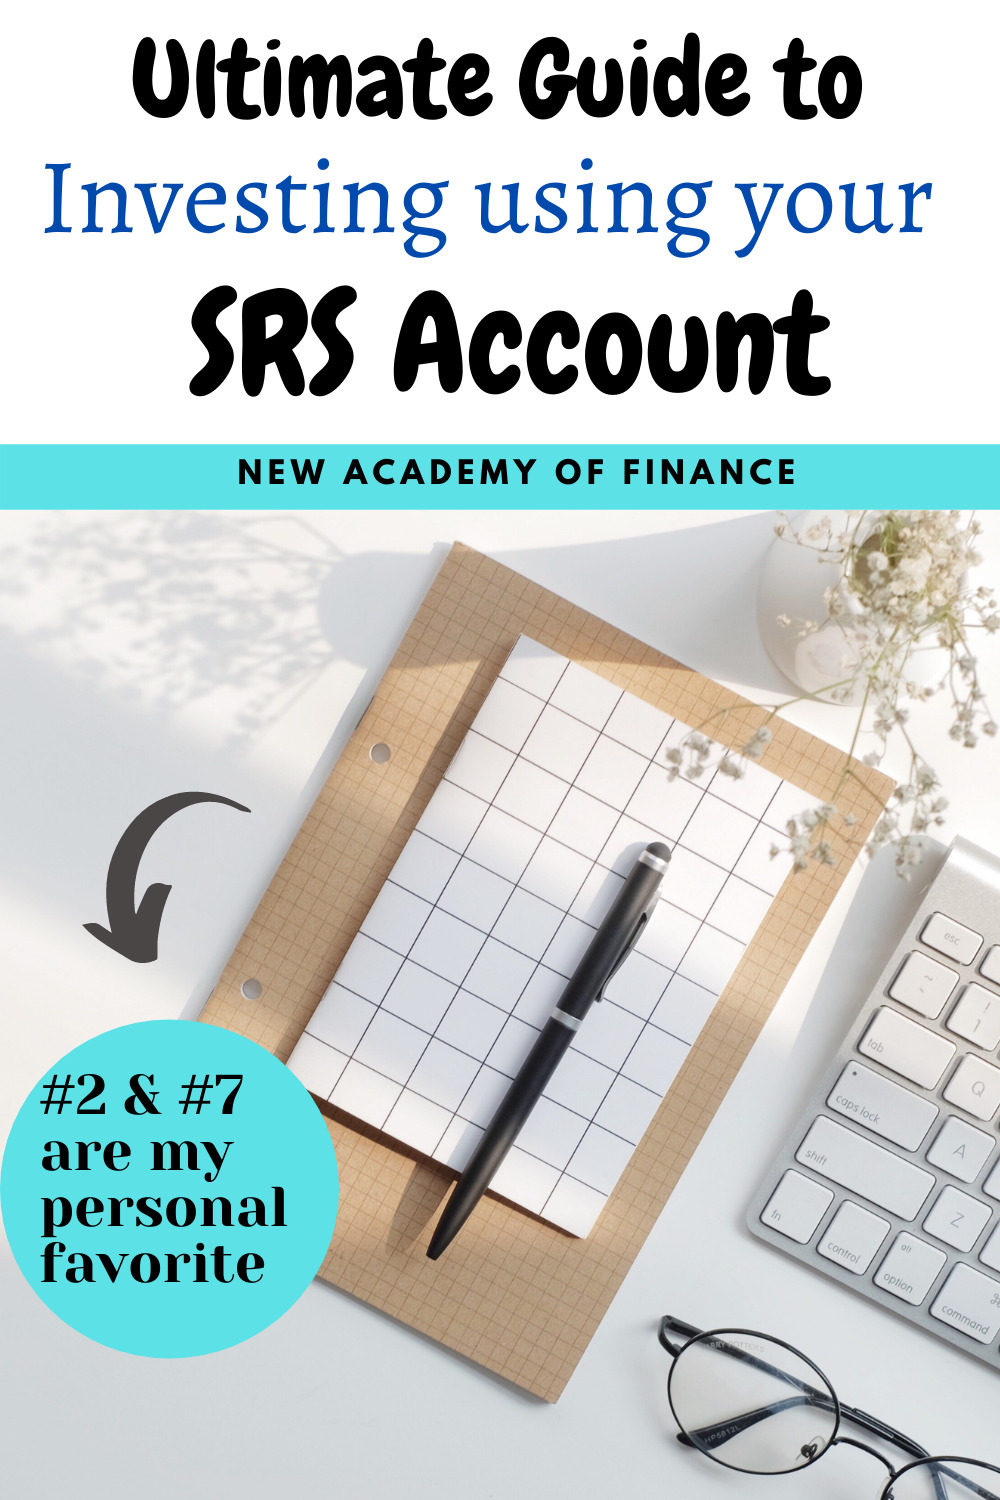 Investing using SRS account